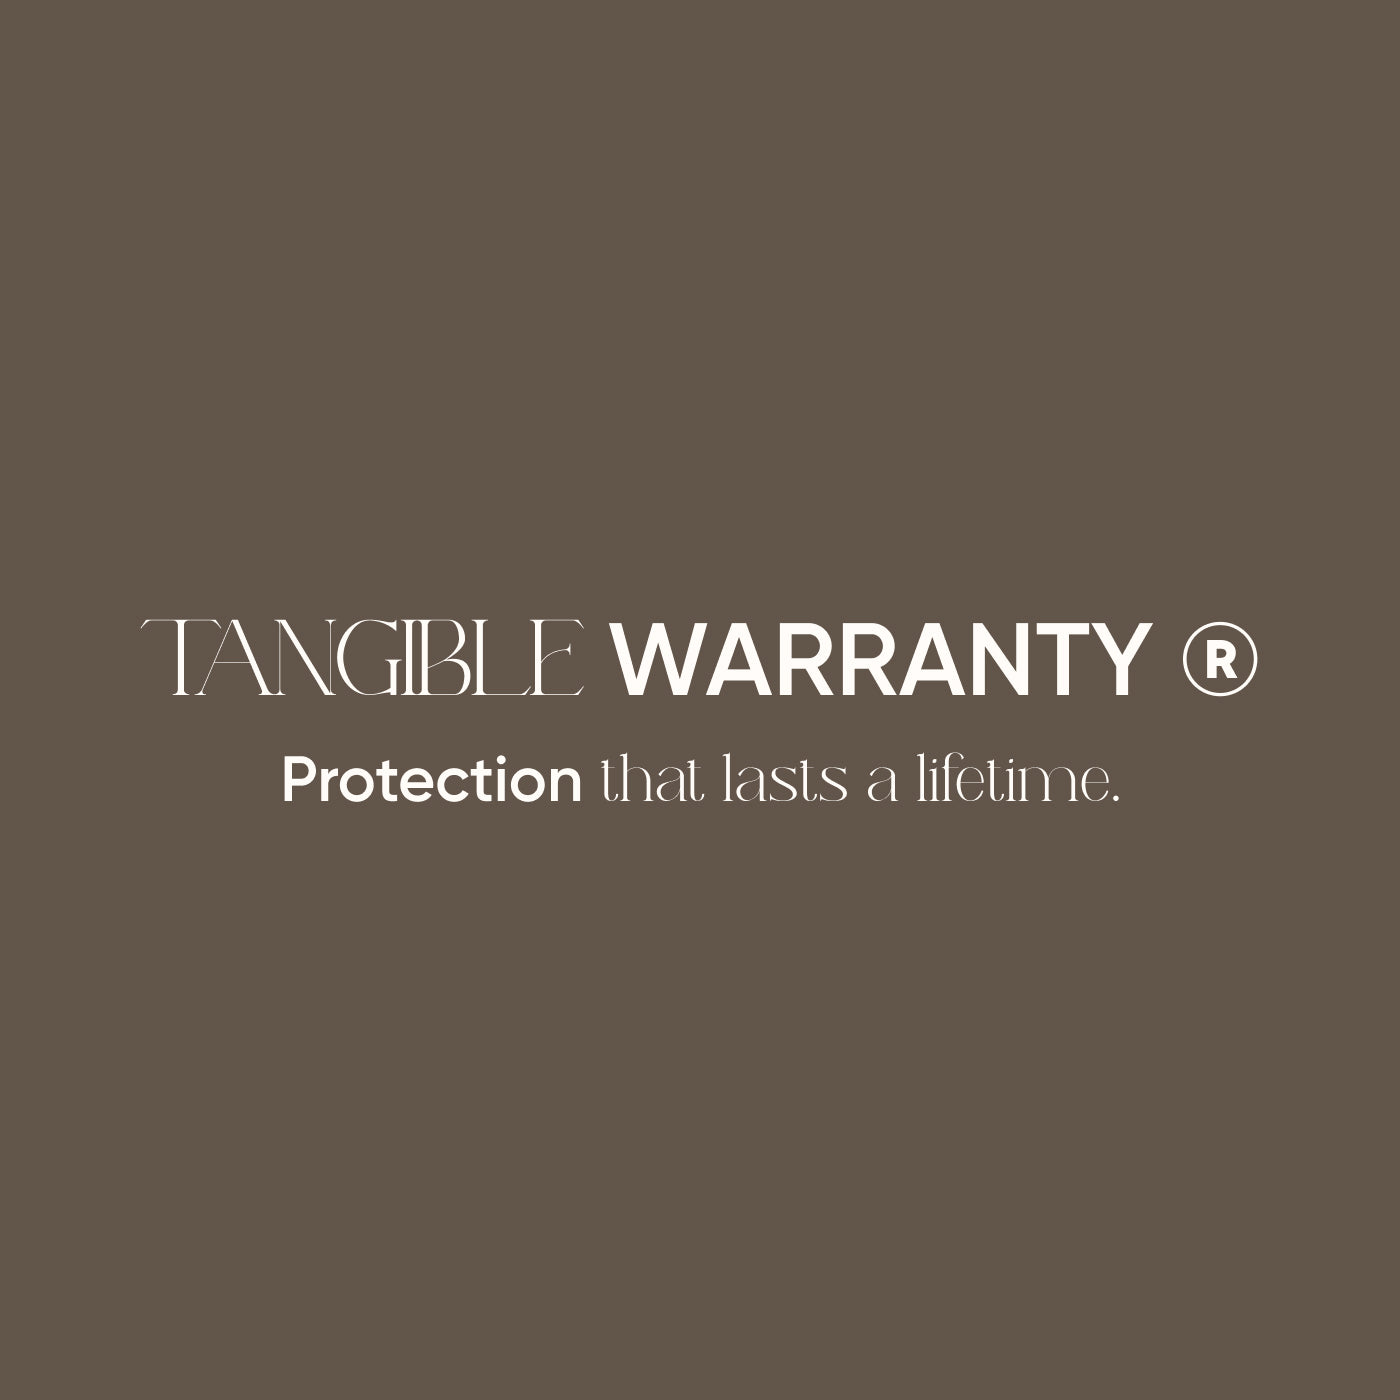 TANGIBLE WARRANTY™